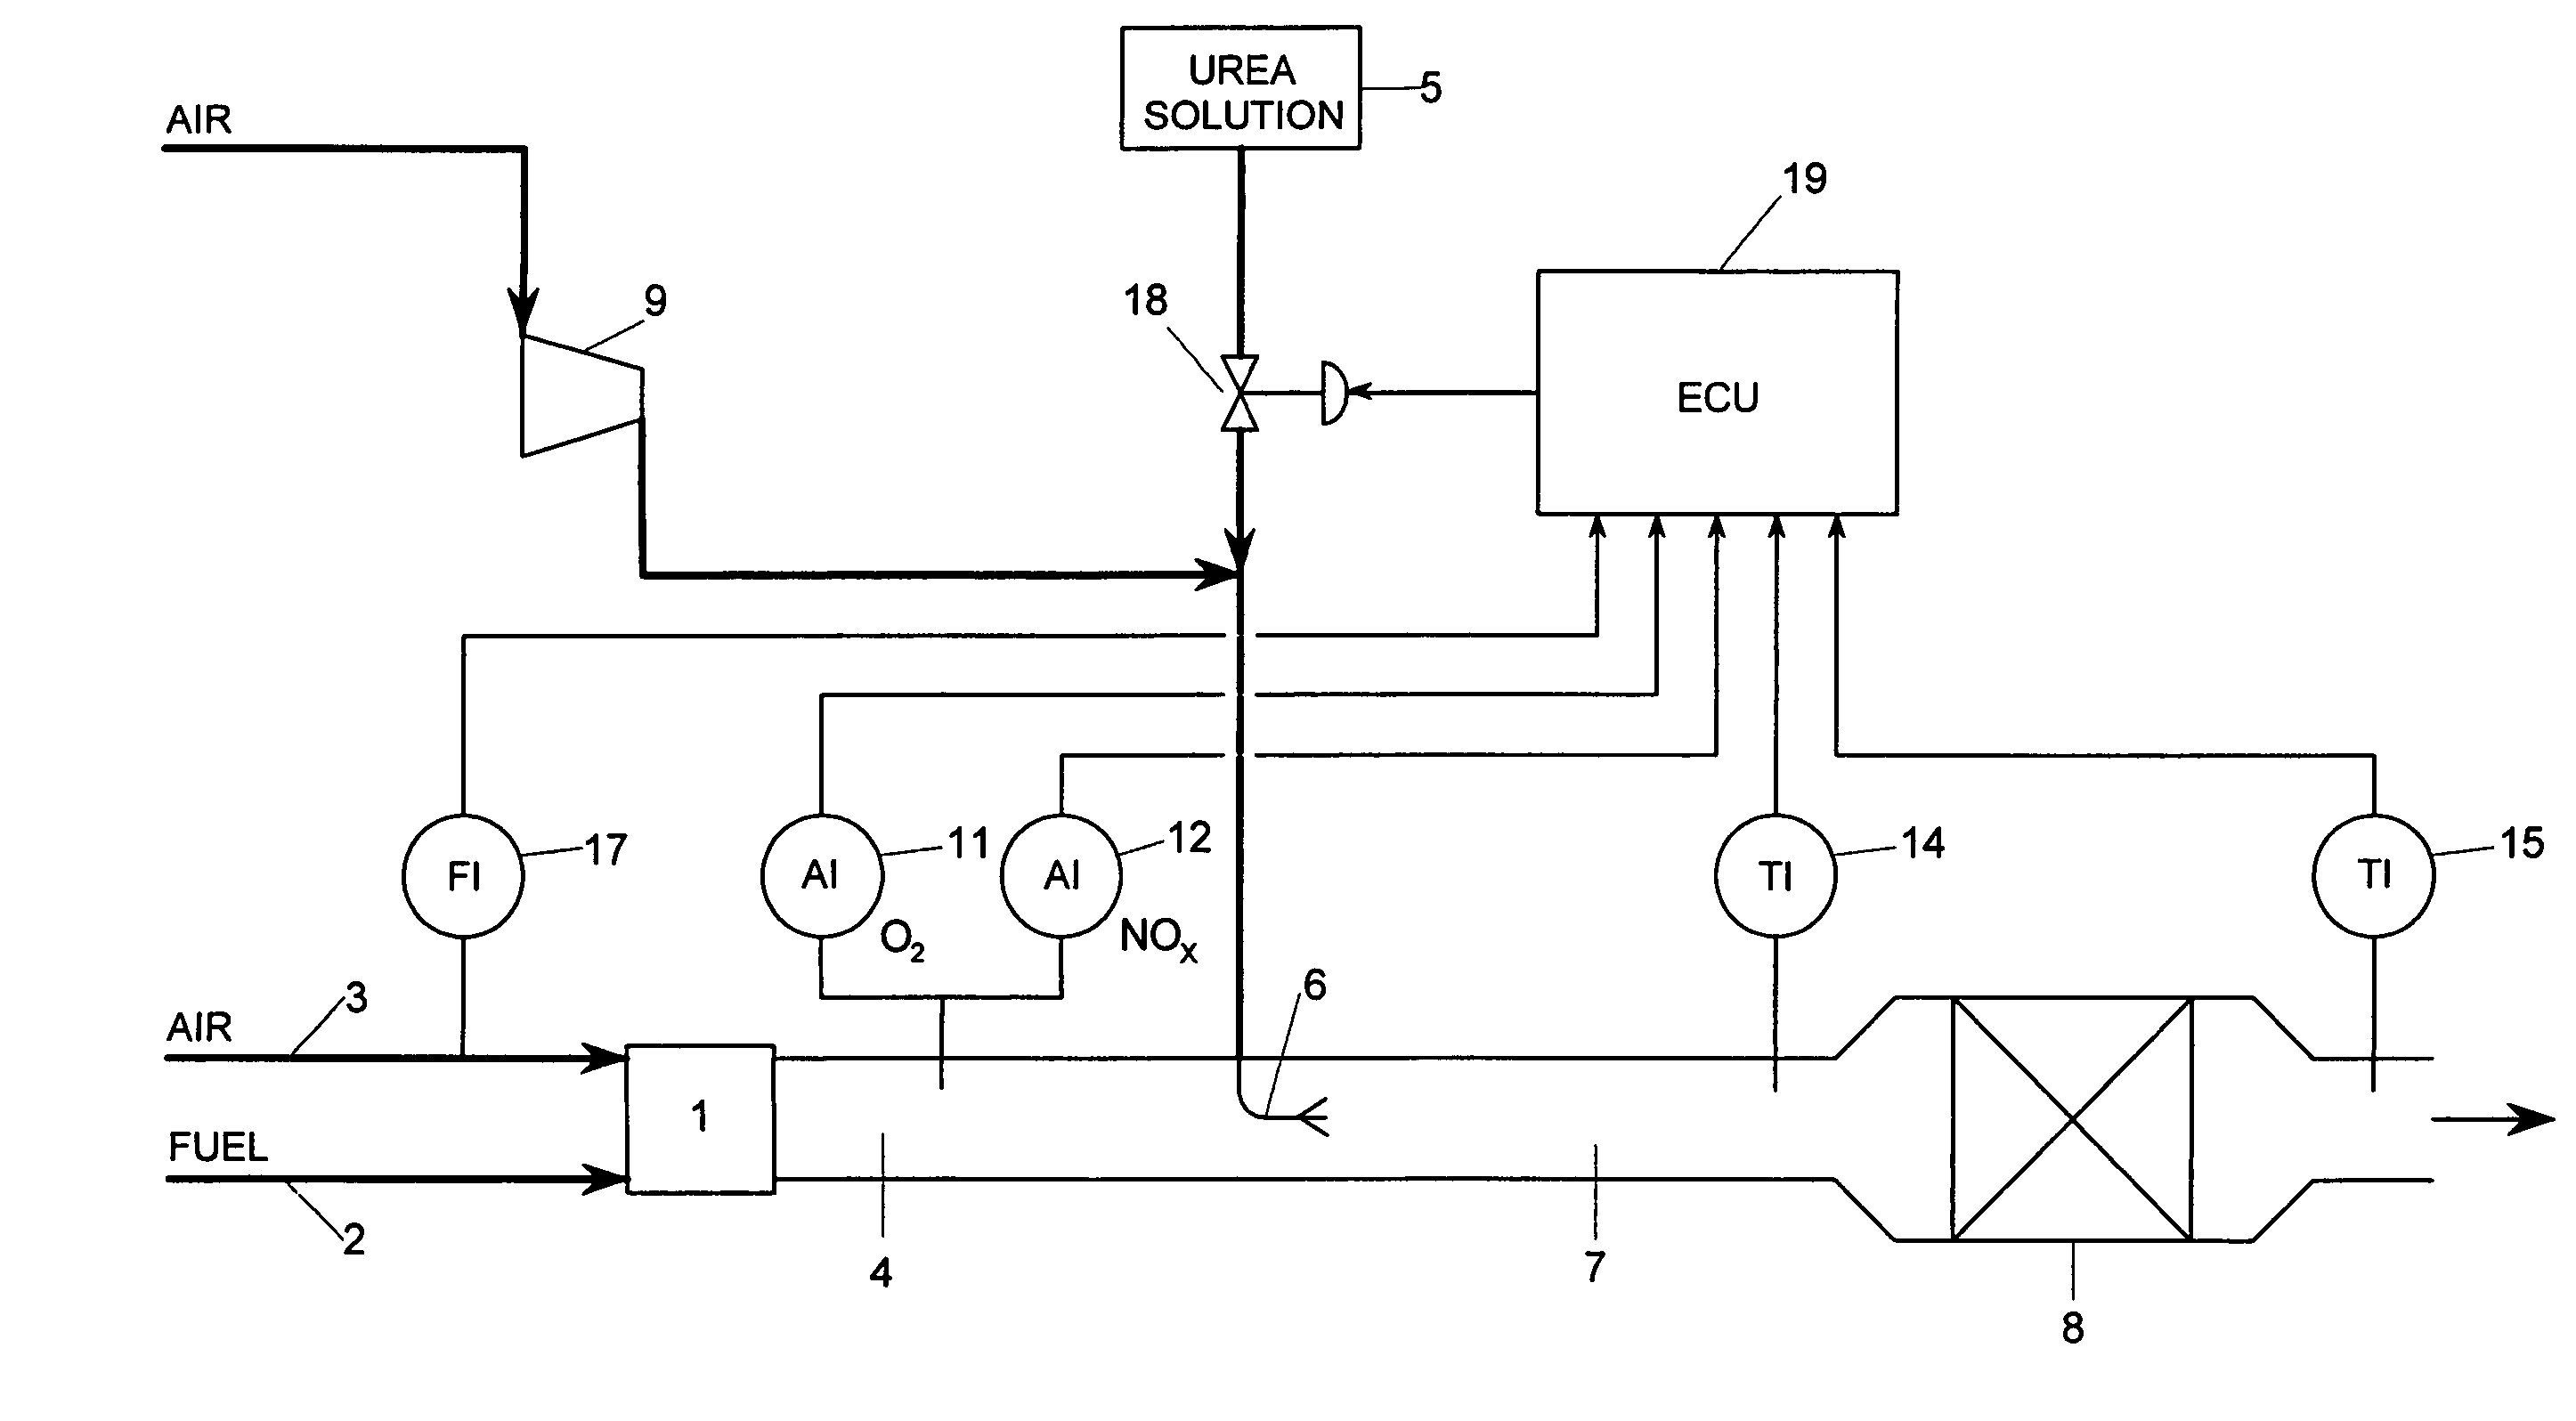 Method for controlling injection of reducing agent in exhaust gas from a combustion engine